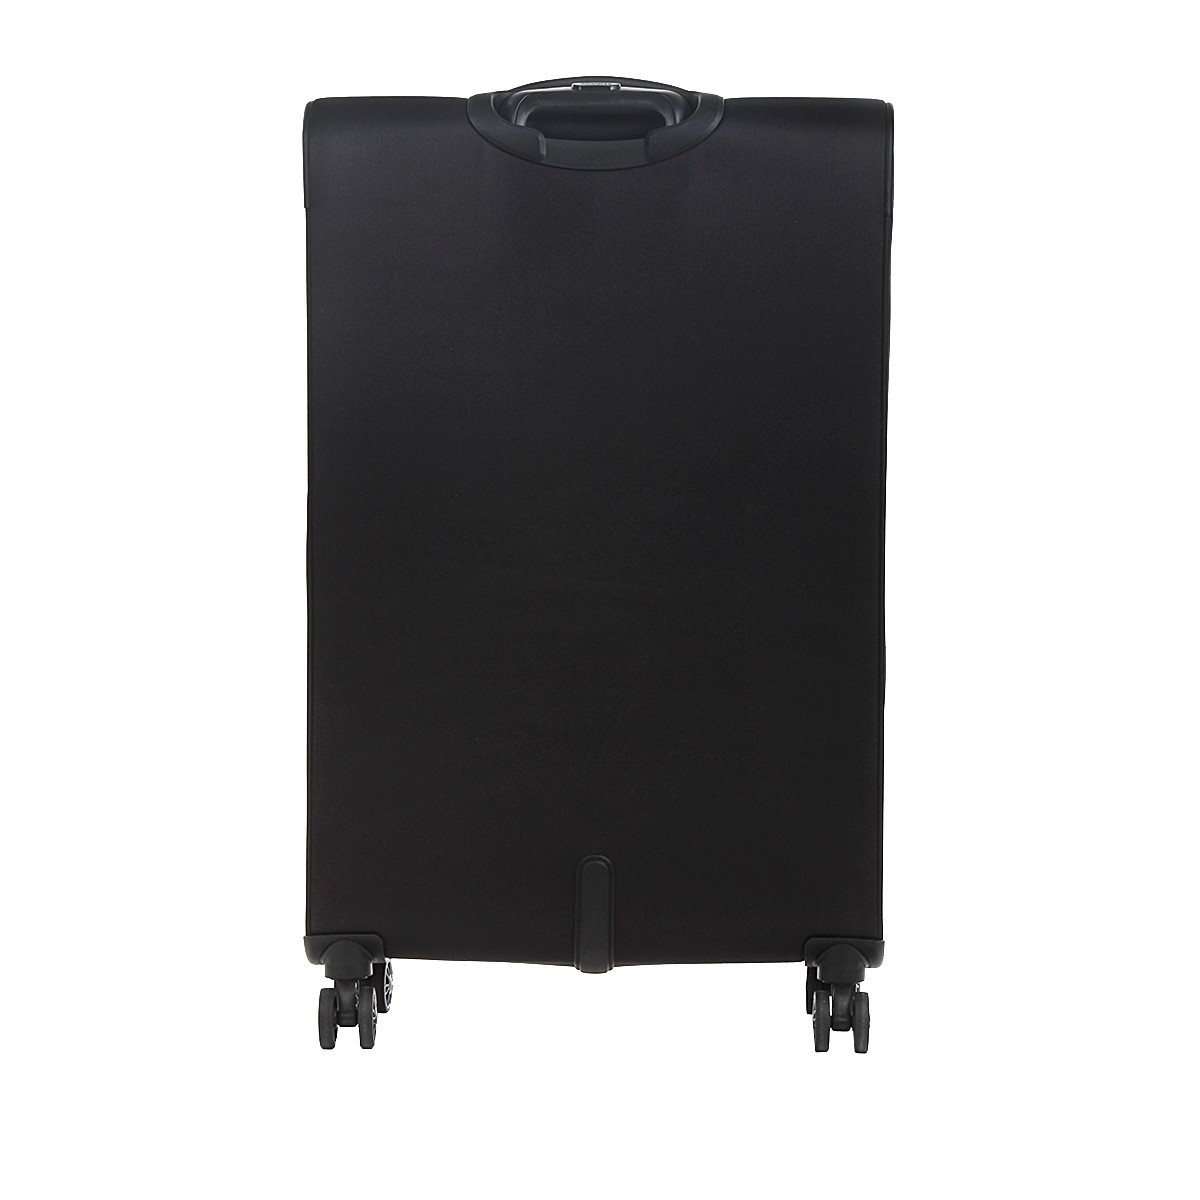 American tourister by samsonite Spinner l 4 ruote Asphalt black Pulsonic MD6*09003